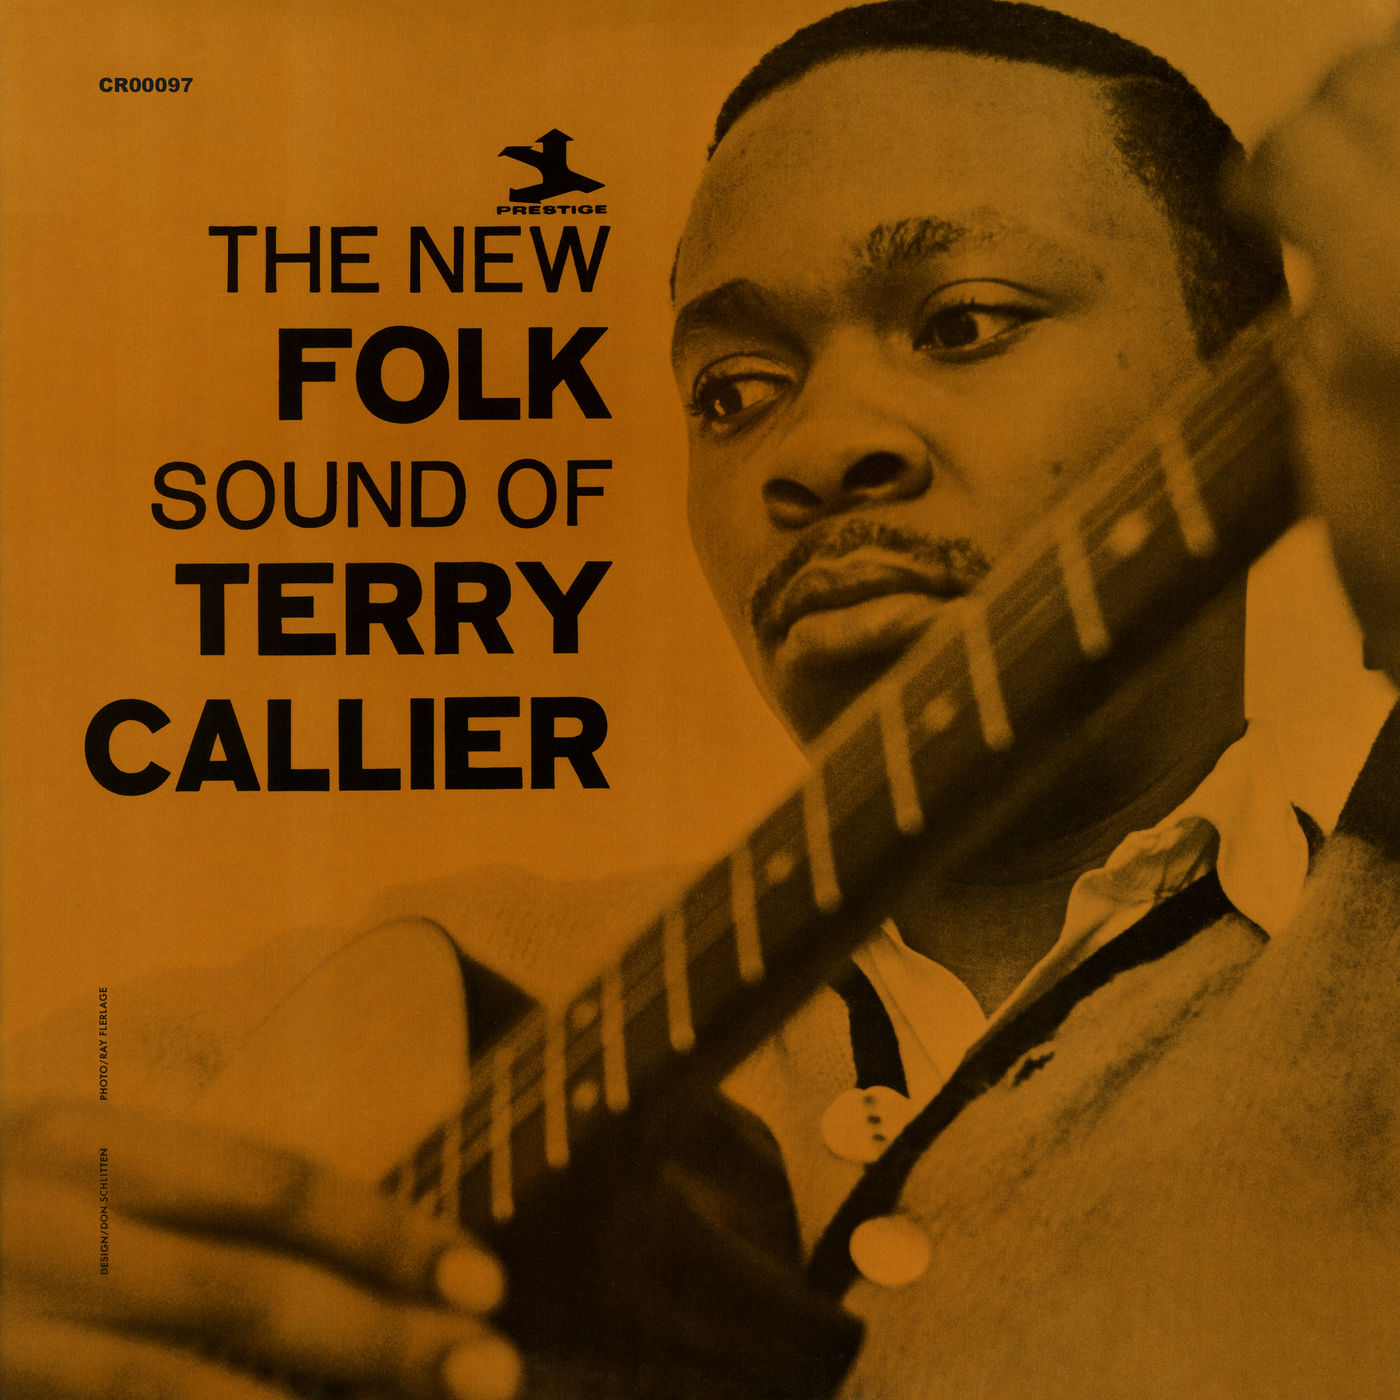 Terry Callier - The New Folk Sound Of Terry Callier (Deluxe Edition) (1968/2018) [FLAC 24bit/192kHz]